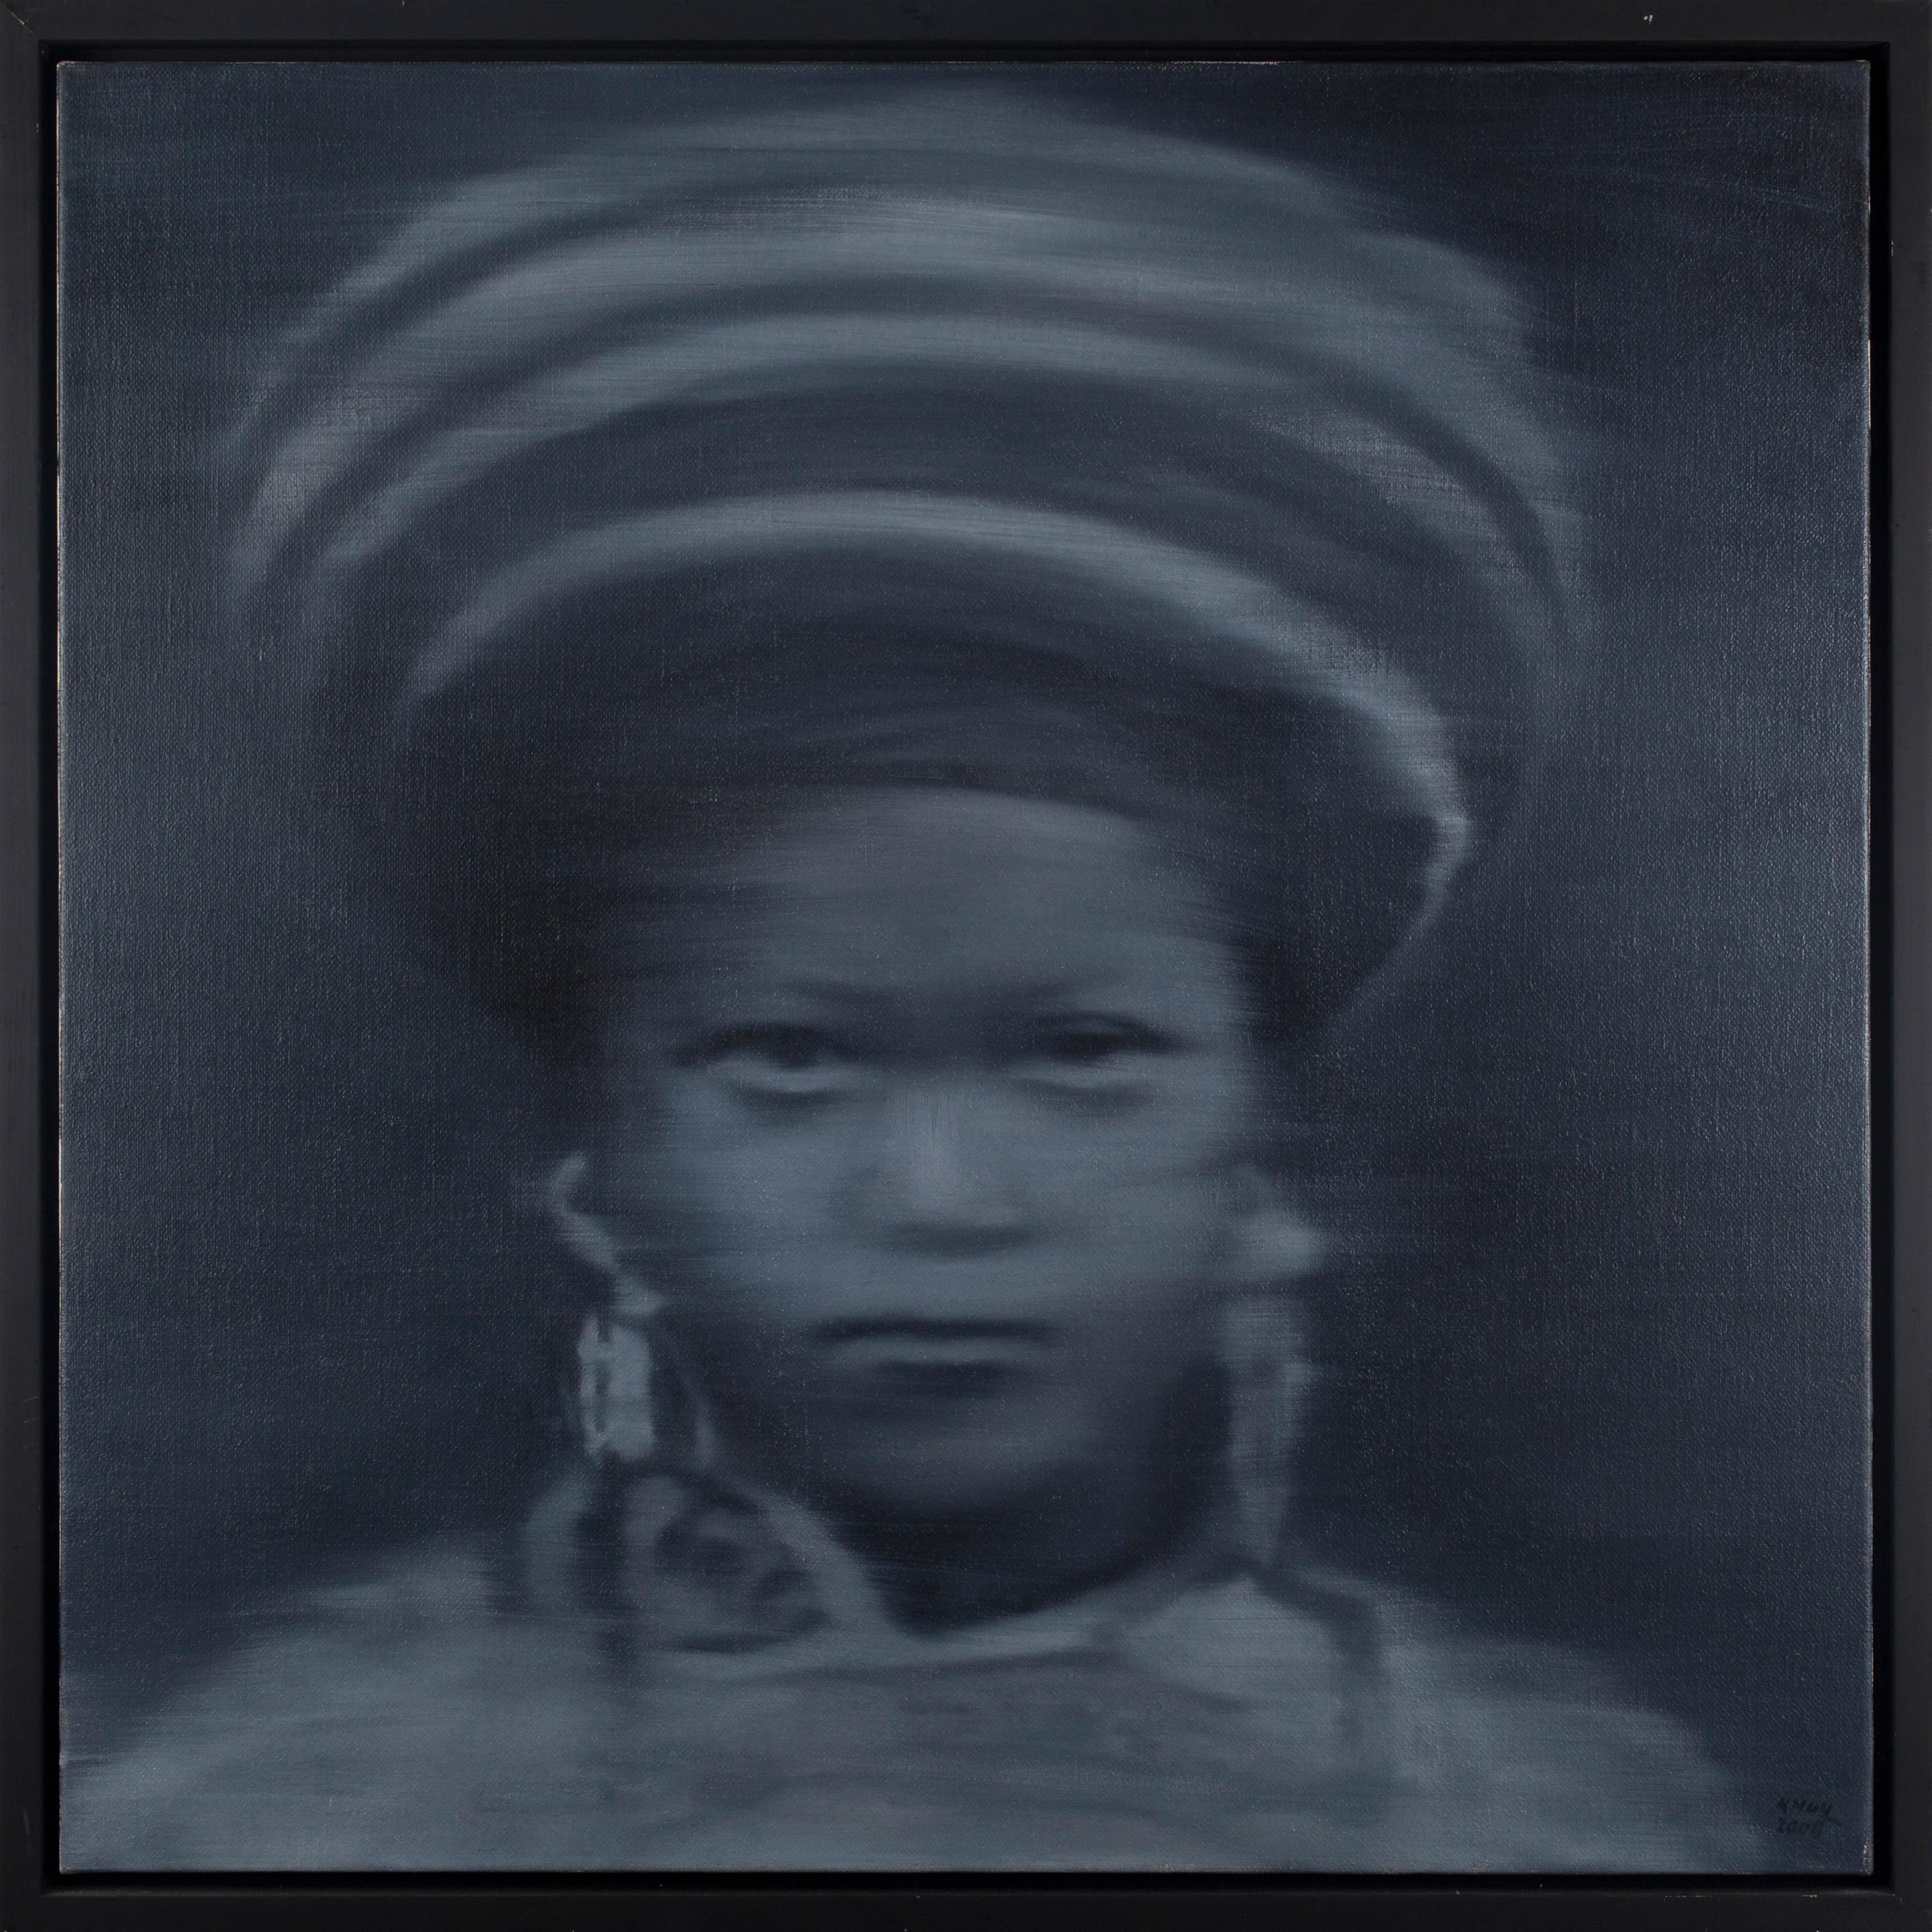 Nguyen Quang Huy Figurative Painting – Fotorealistisches Porträtgemälde „Tribal Indochine Woman II“, Indochine